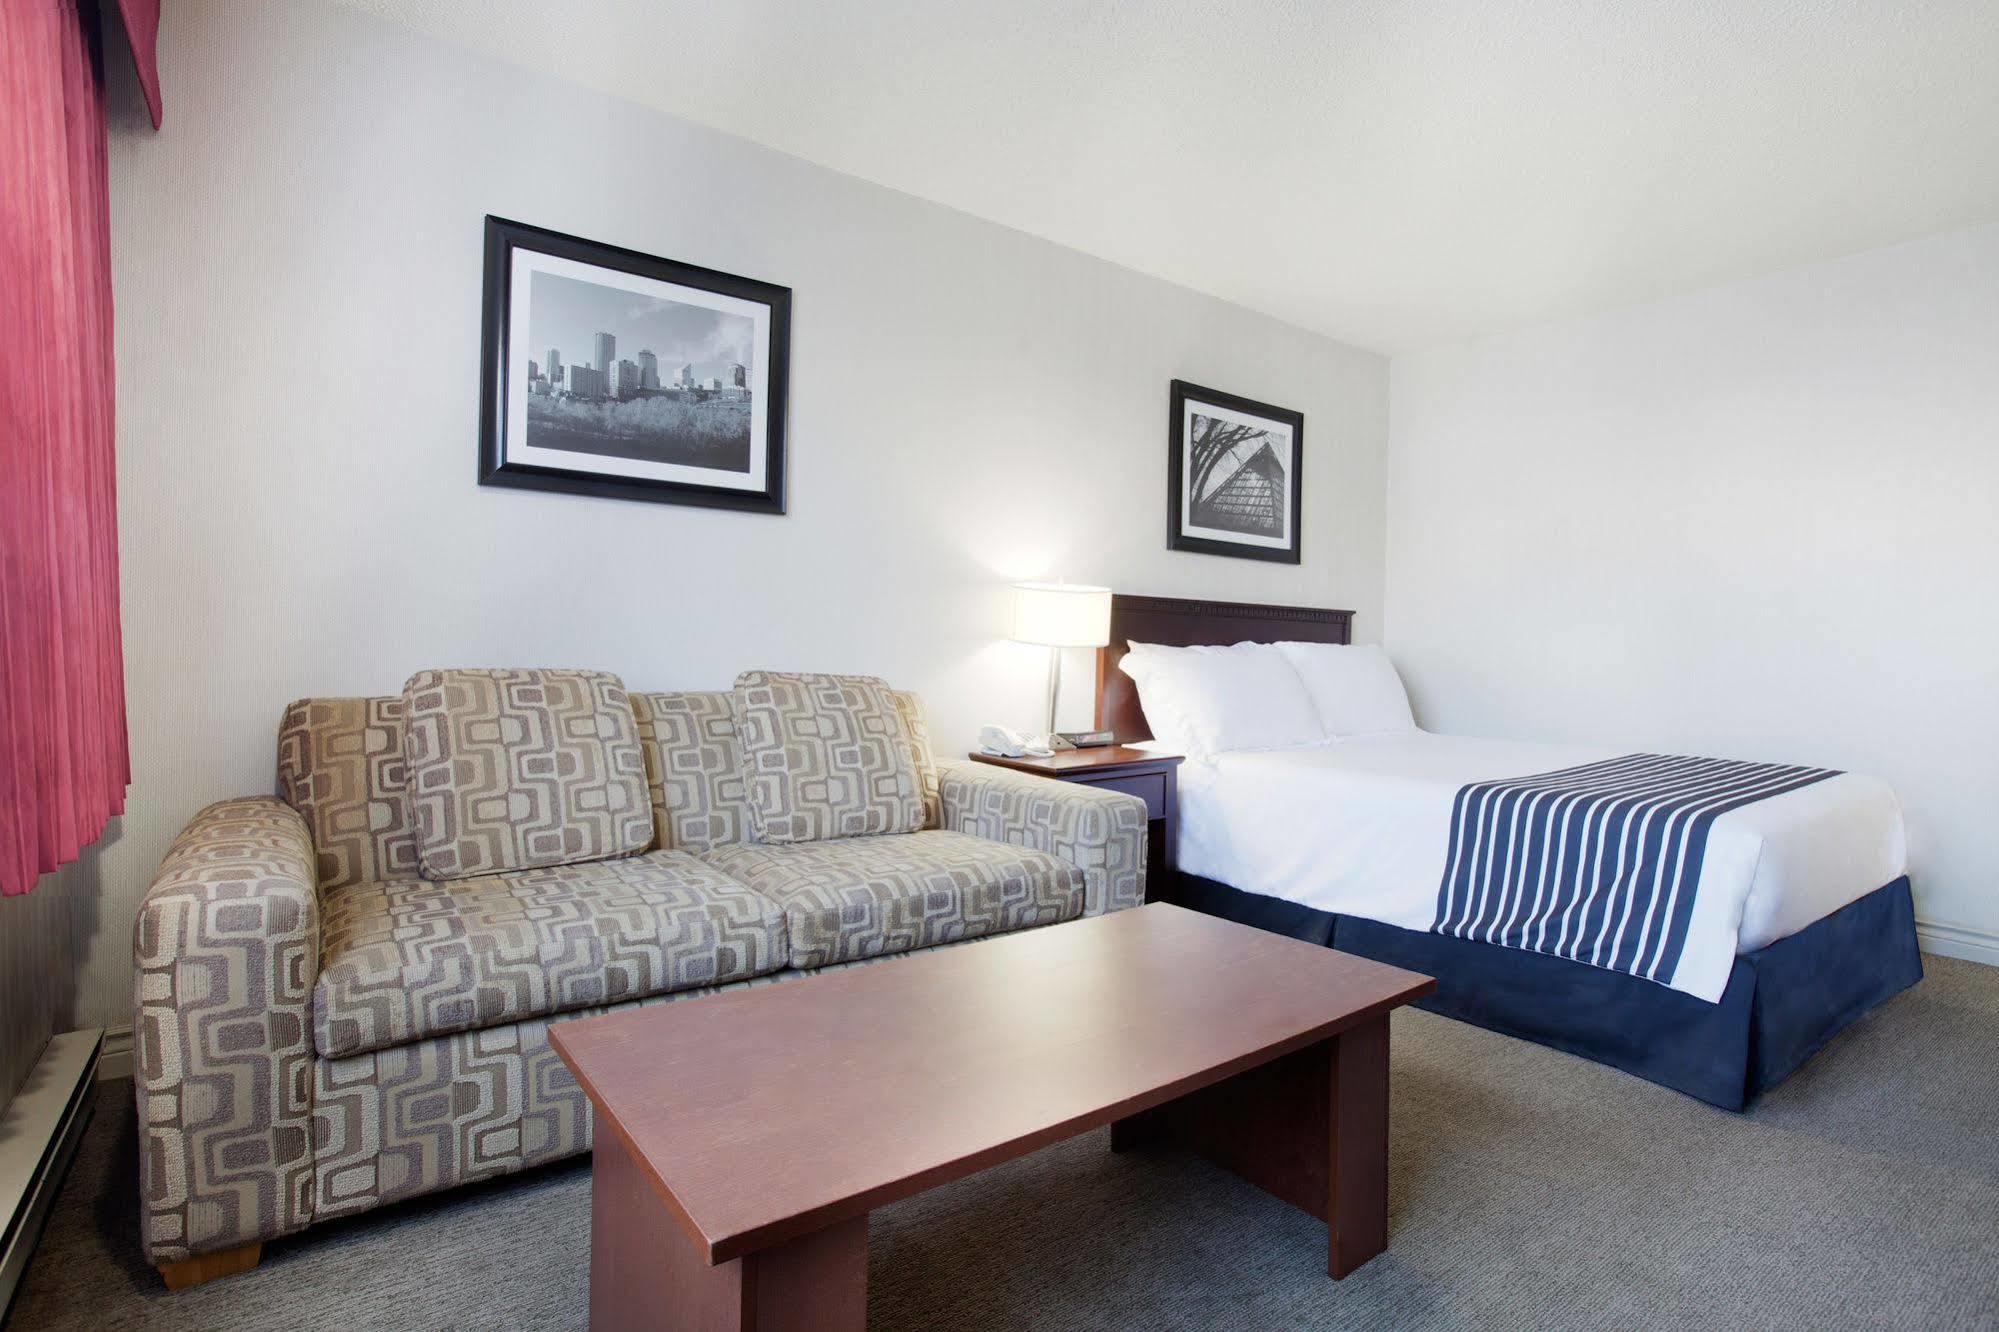 Stay at the Best Hotel by West Edmonton Mall - Sandman Hotel